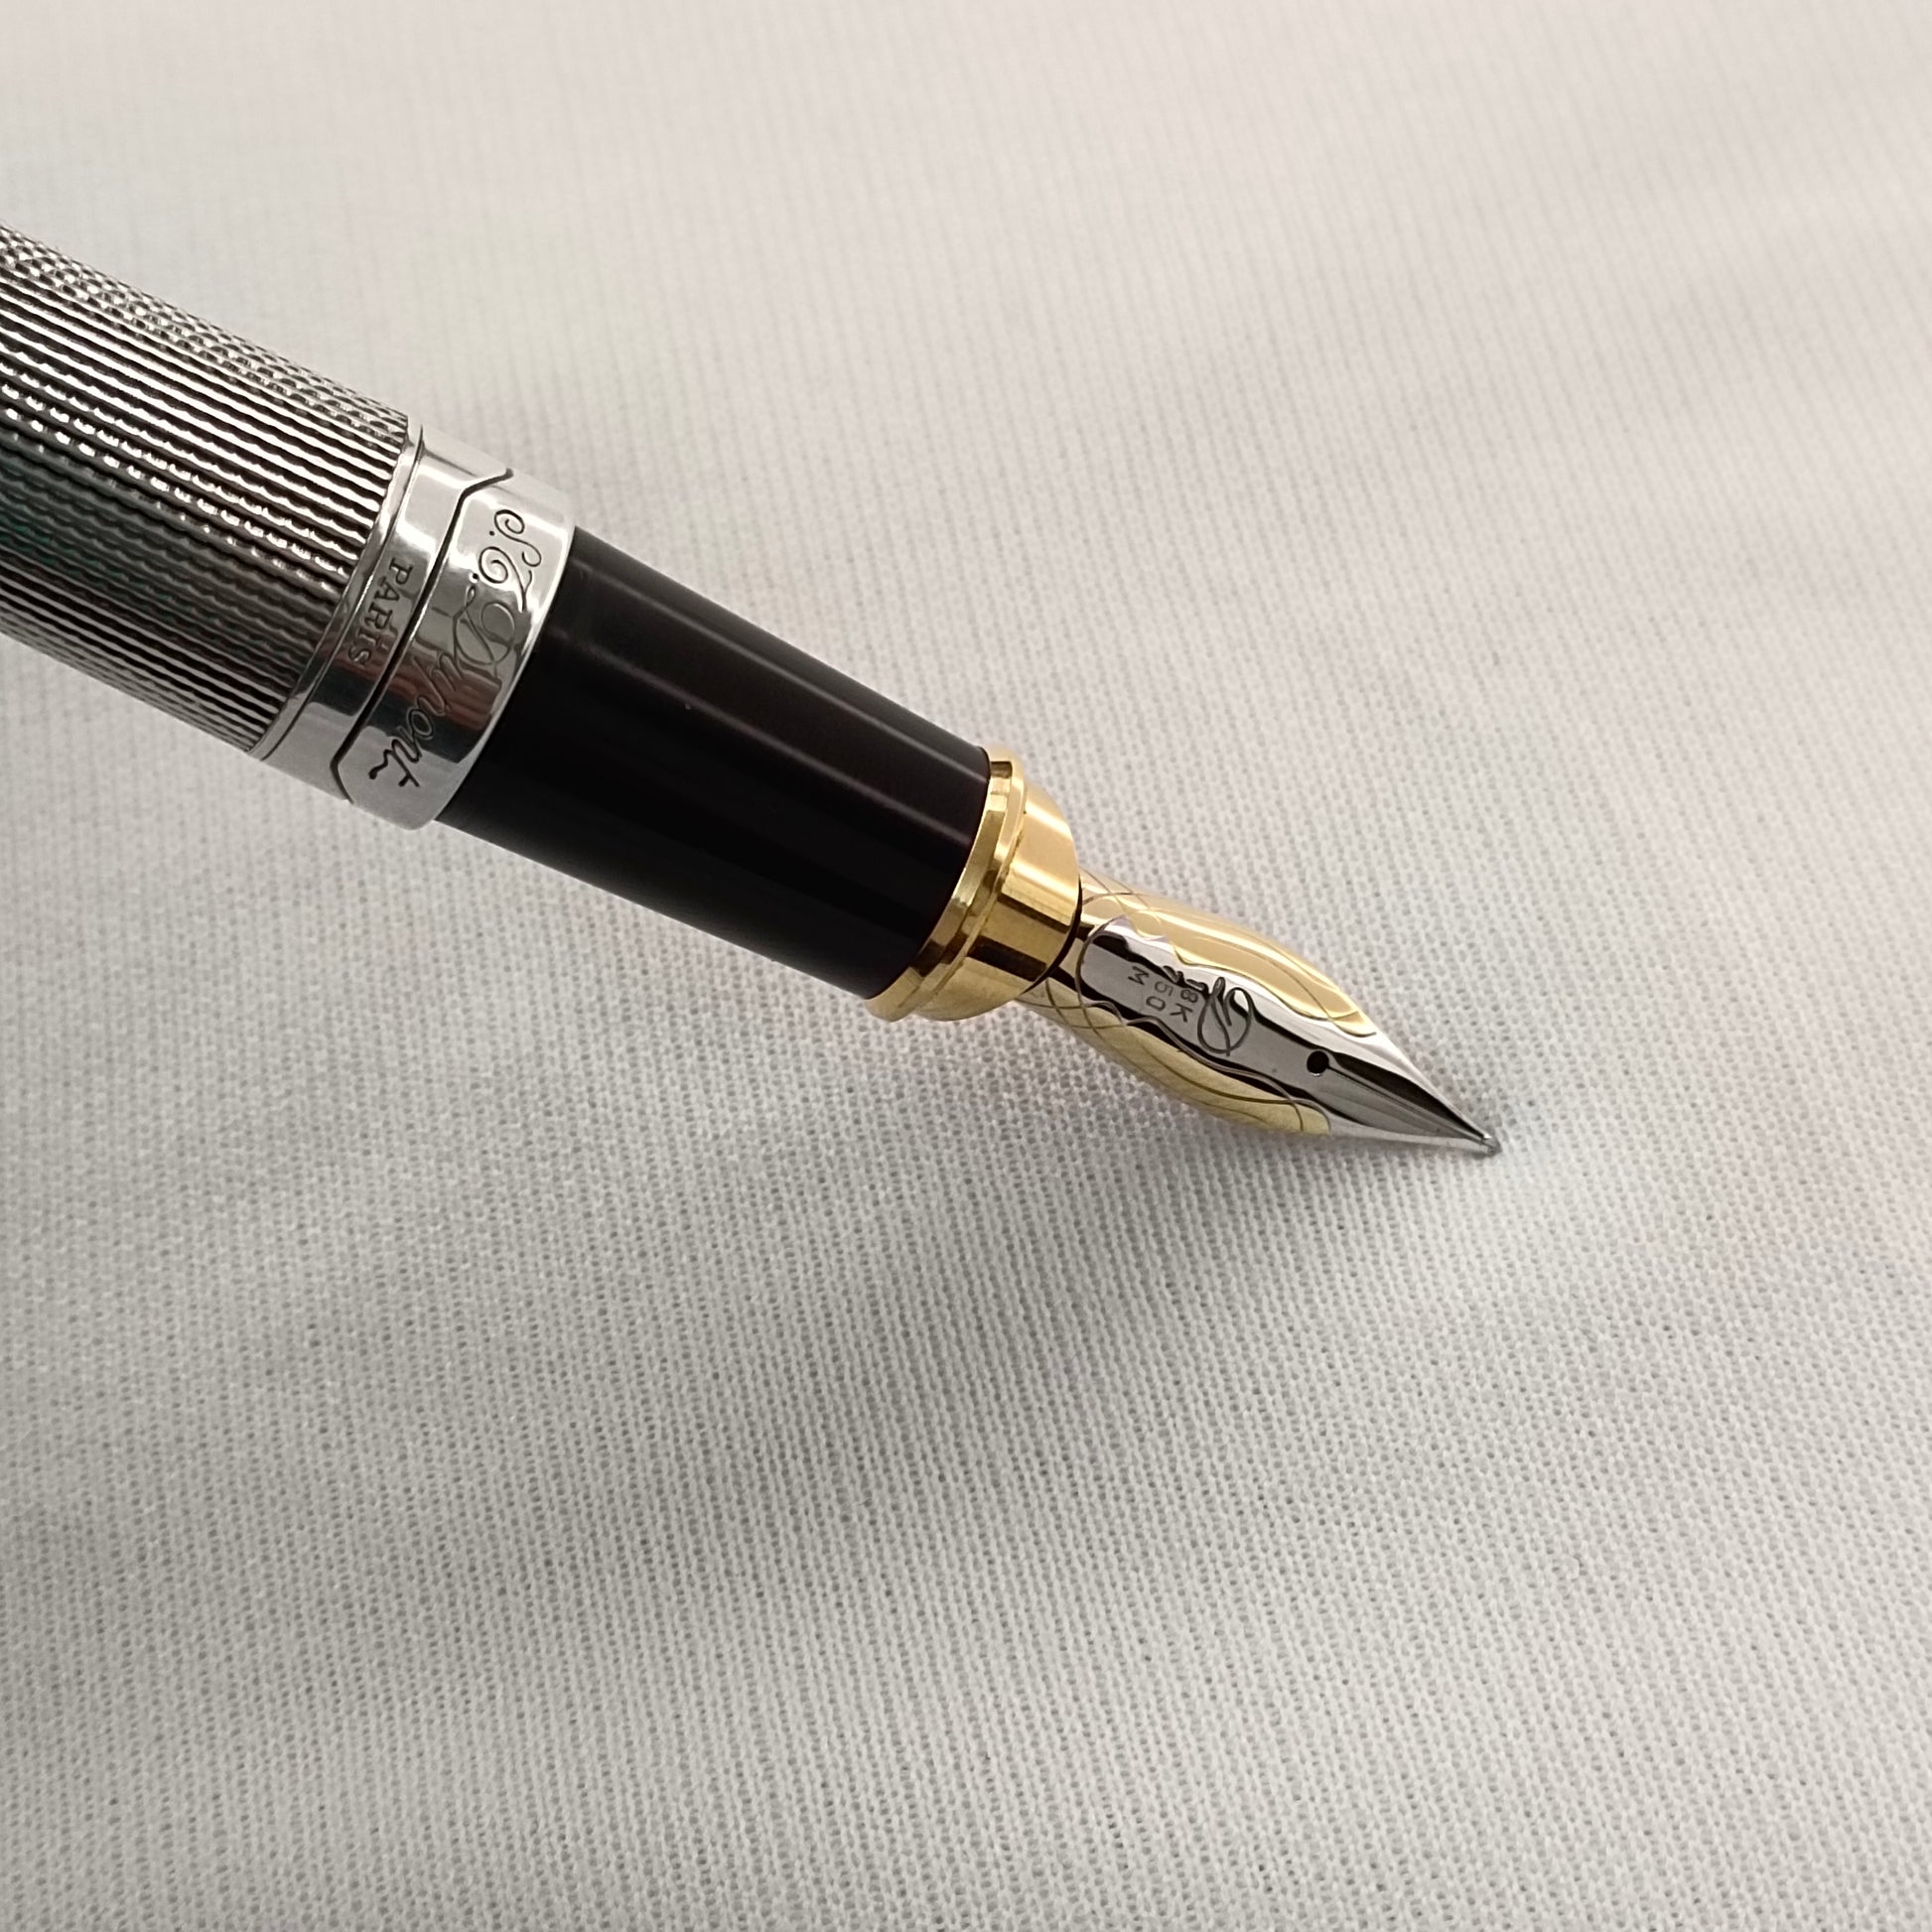 S.T. Dupont Classic Gold Plated Silver Vermeil Ballpoint Pen Black